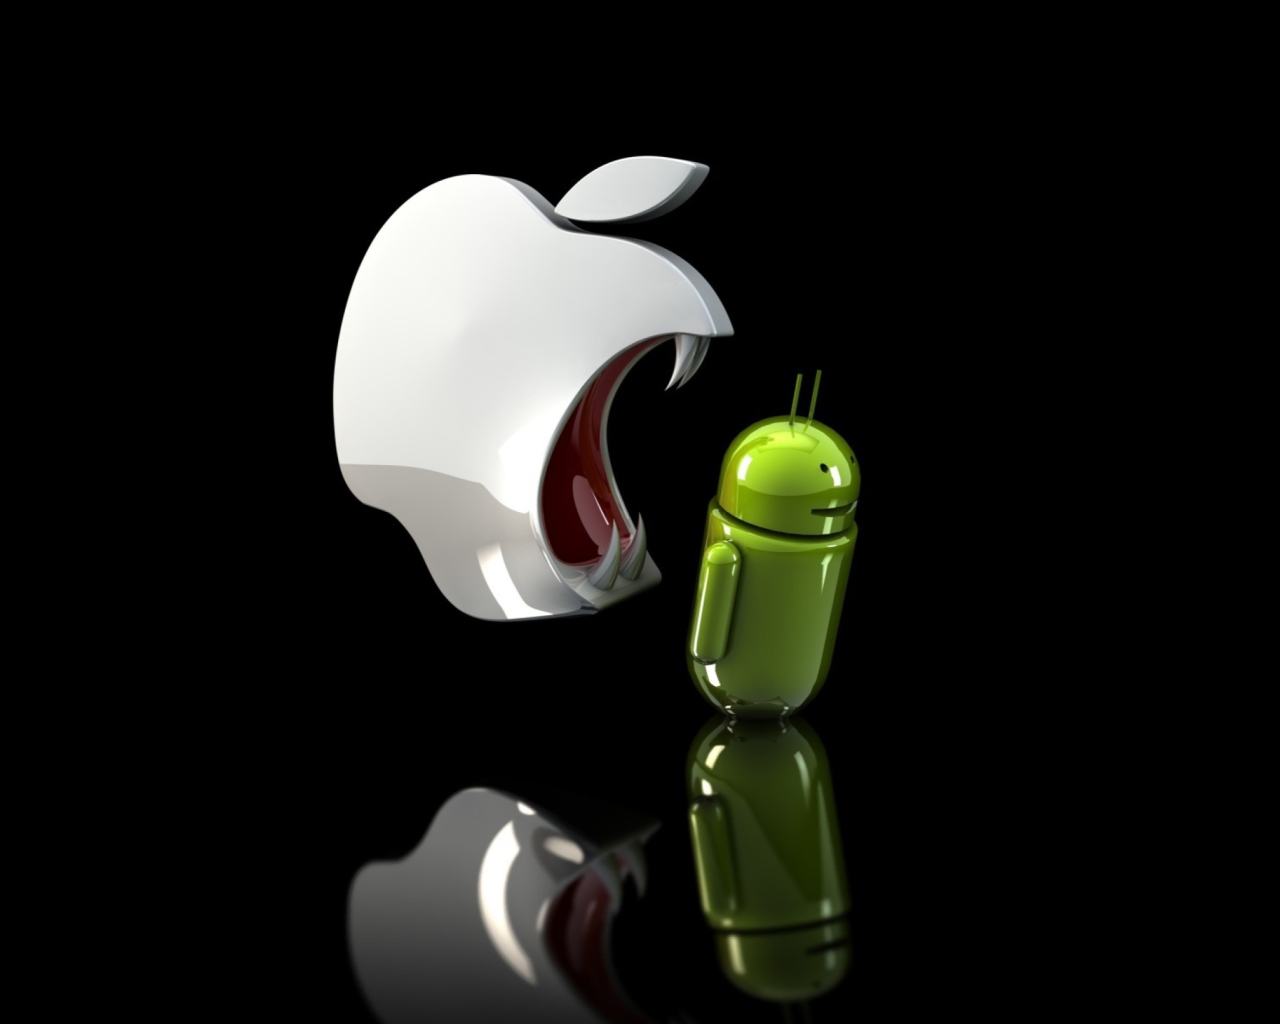 Apple Against Android screenshot #1 1280x1024